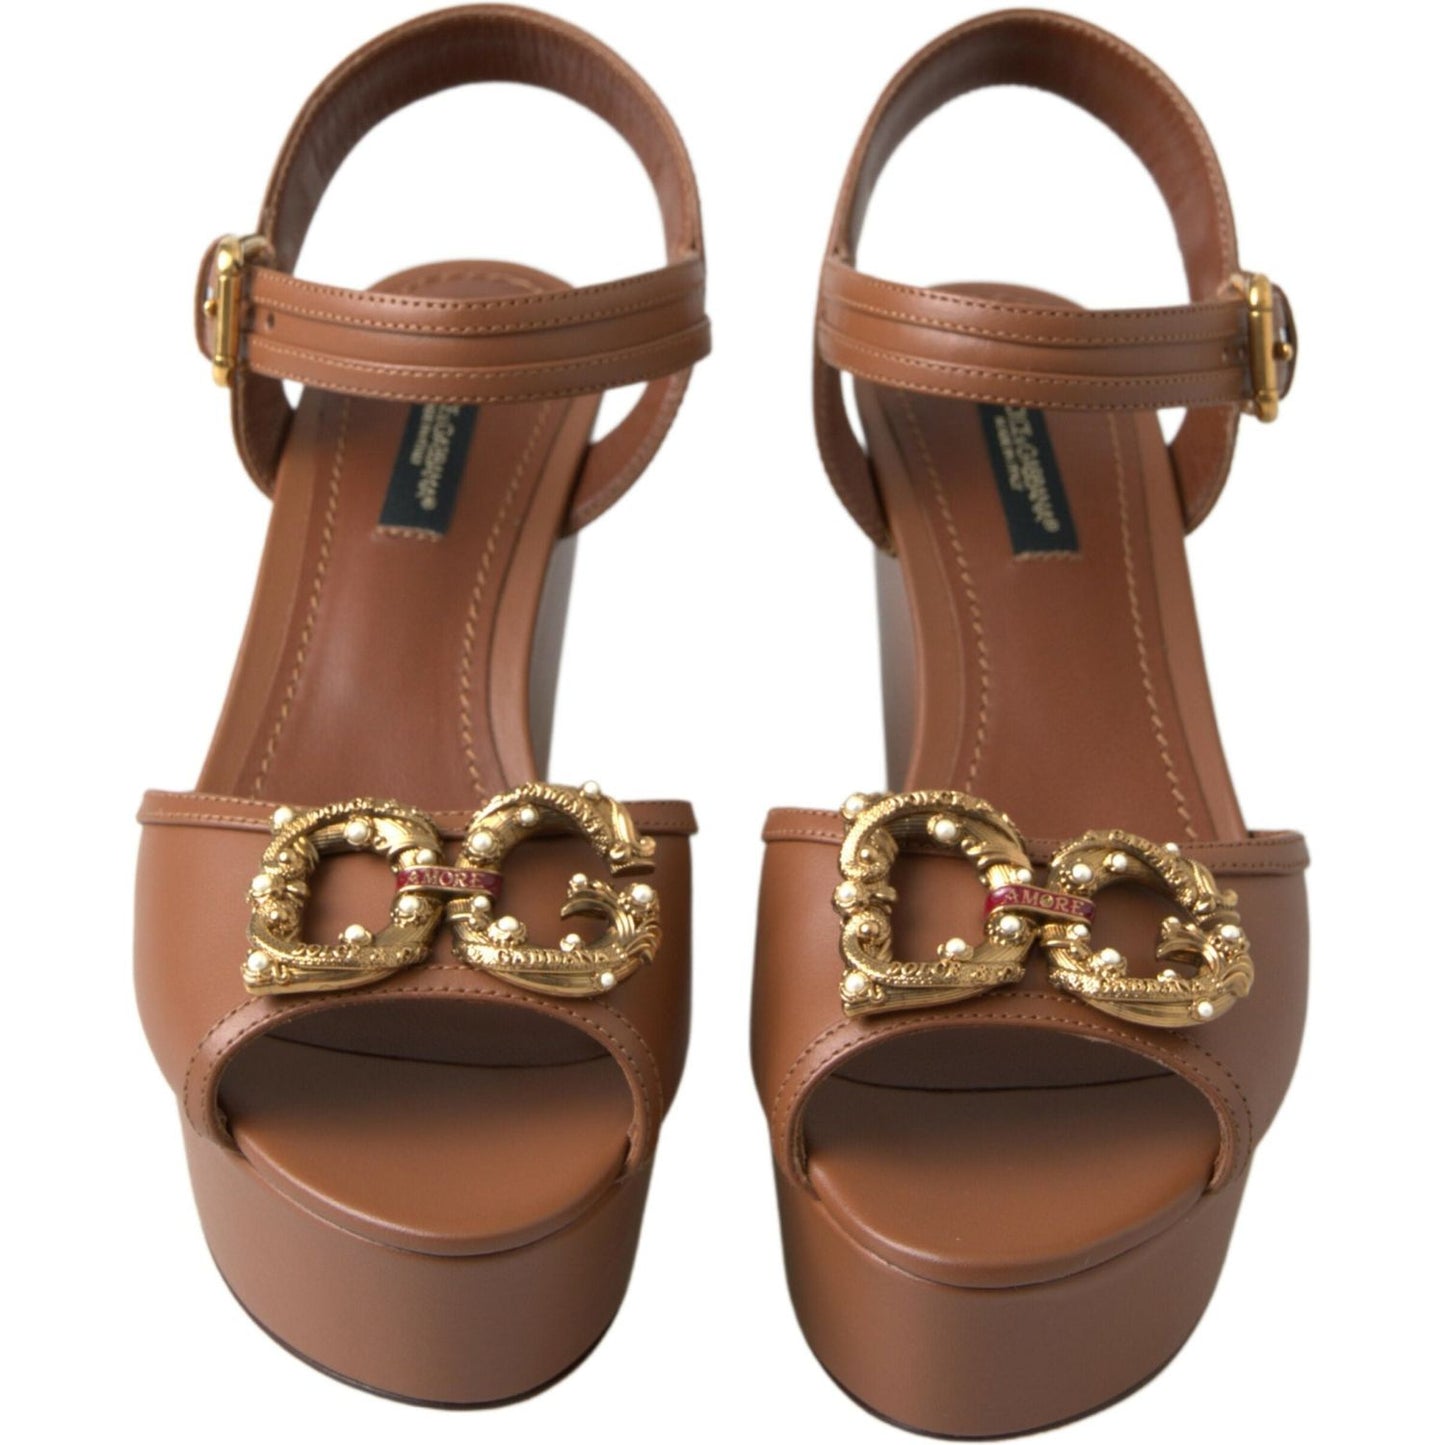 Dolce & Gabbana Chic Brown Leather Ankle Strap Wedges brown-leather-amore-wedges-sandals-shoes